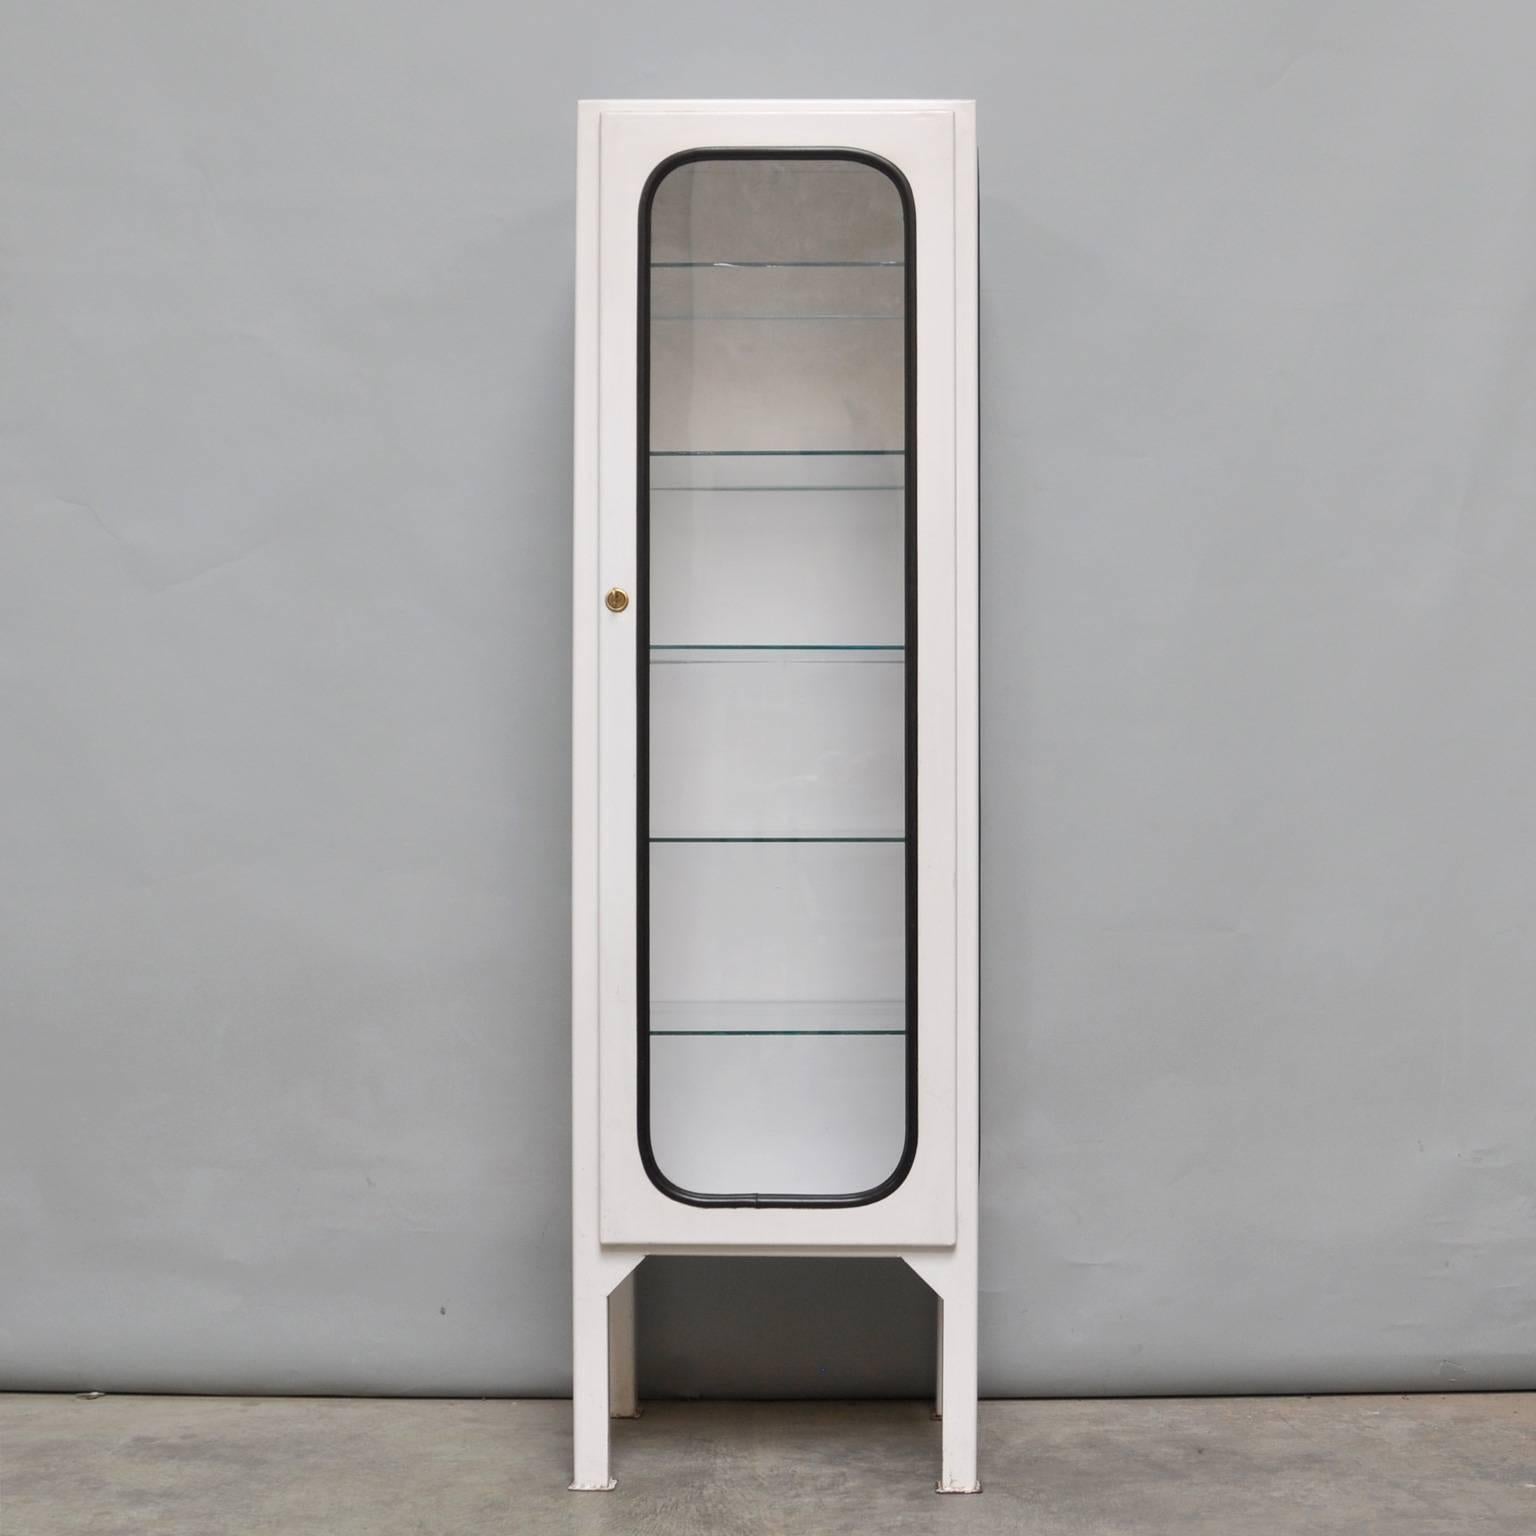 This medicine cabinet was designed in the 1970s and produced in 1975 in Hungary. It is made from steel and glass, with the glass panes held in place by a black rubber strip. The cabinet features five adjustable glass shelves and a functioning lock.